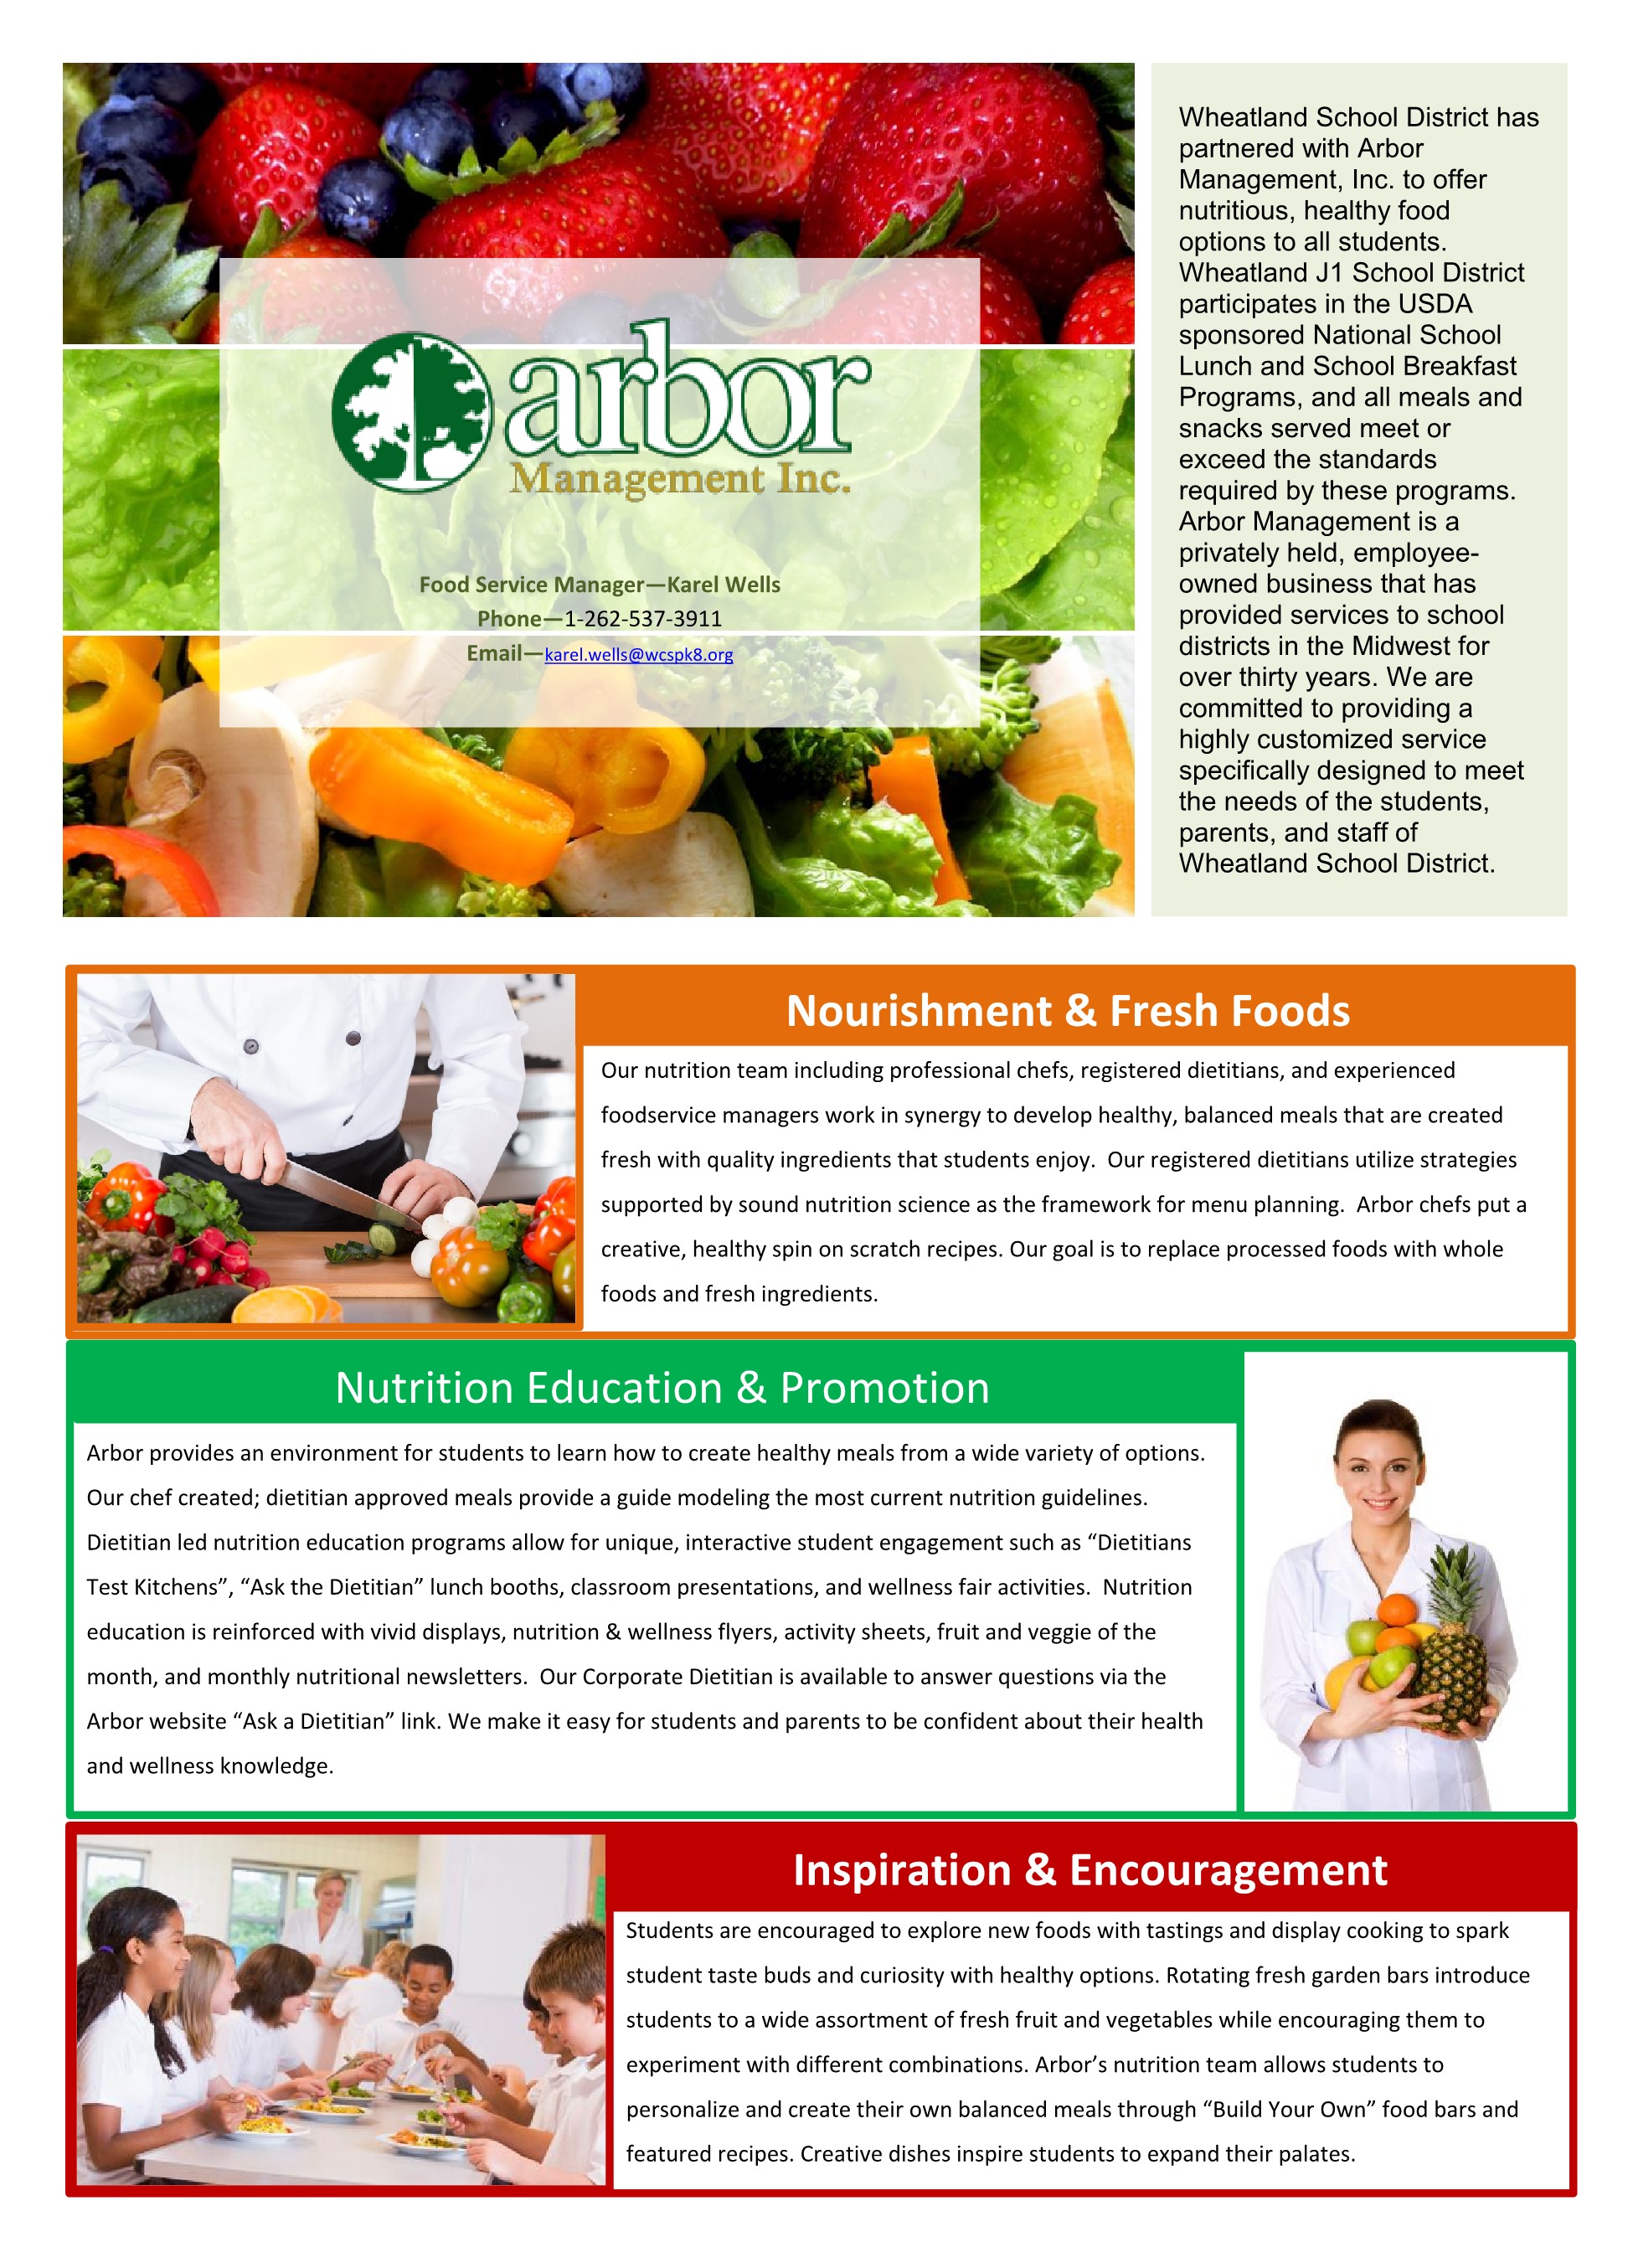 Wheatland School District has partnered with Arbor Management, Inc. to offer nutritious, healthy food options to all students. Wheatland J1 School District participates in the USDA sponsored National School Lunch and School Breakfast Programs, and all meals and snacks served meet or exceed the standards required by these programs. Arbor Management is a privately held, employee-owned business that has provided services to school districts in the Midwest for over thirty years. We are committed to providing a highly customized service specifically designed to meet the needs of the students, parents, and staff of Wheatland School District.